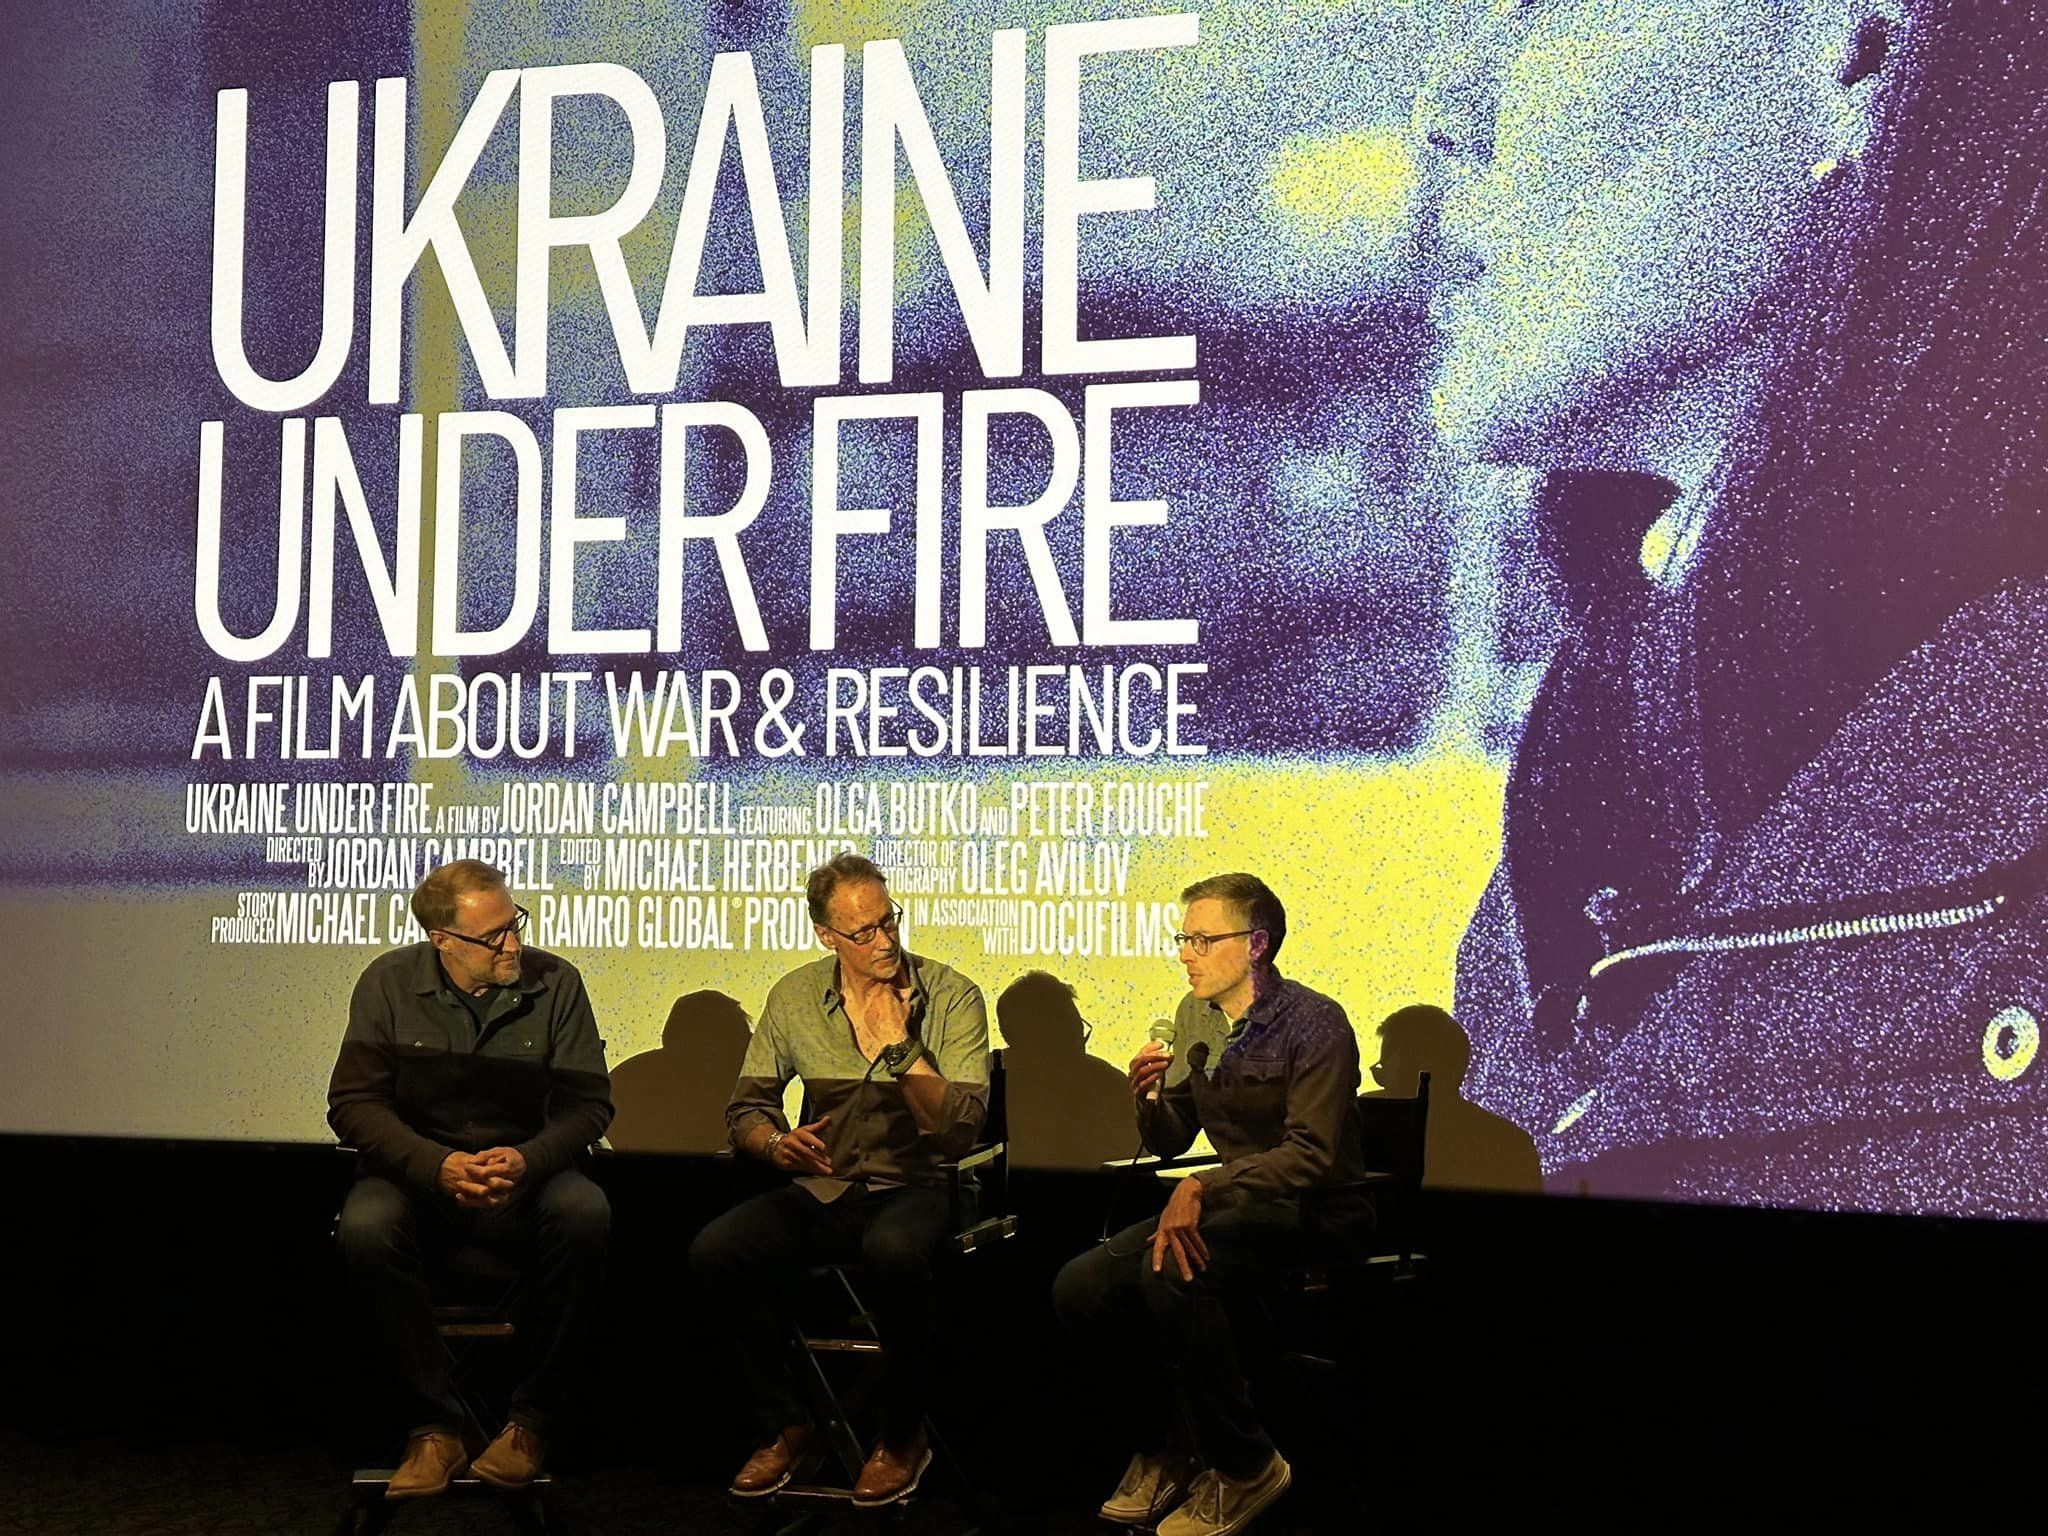 Ukraine Under Fire: A Film about War and Resilience